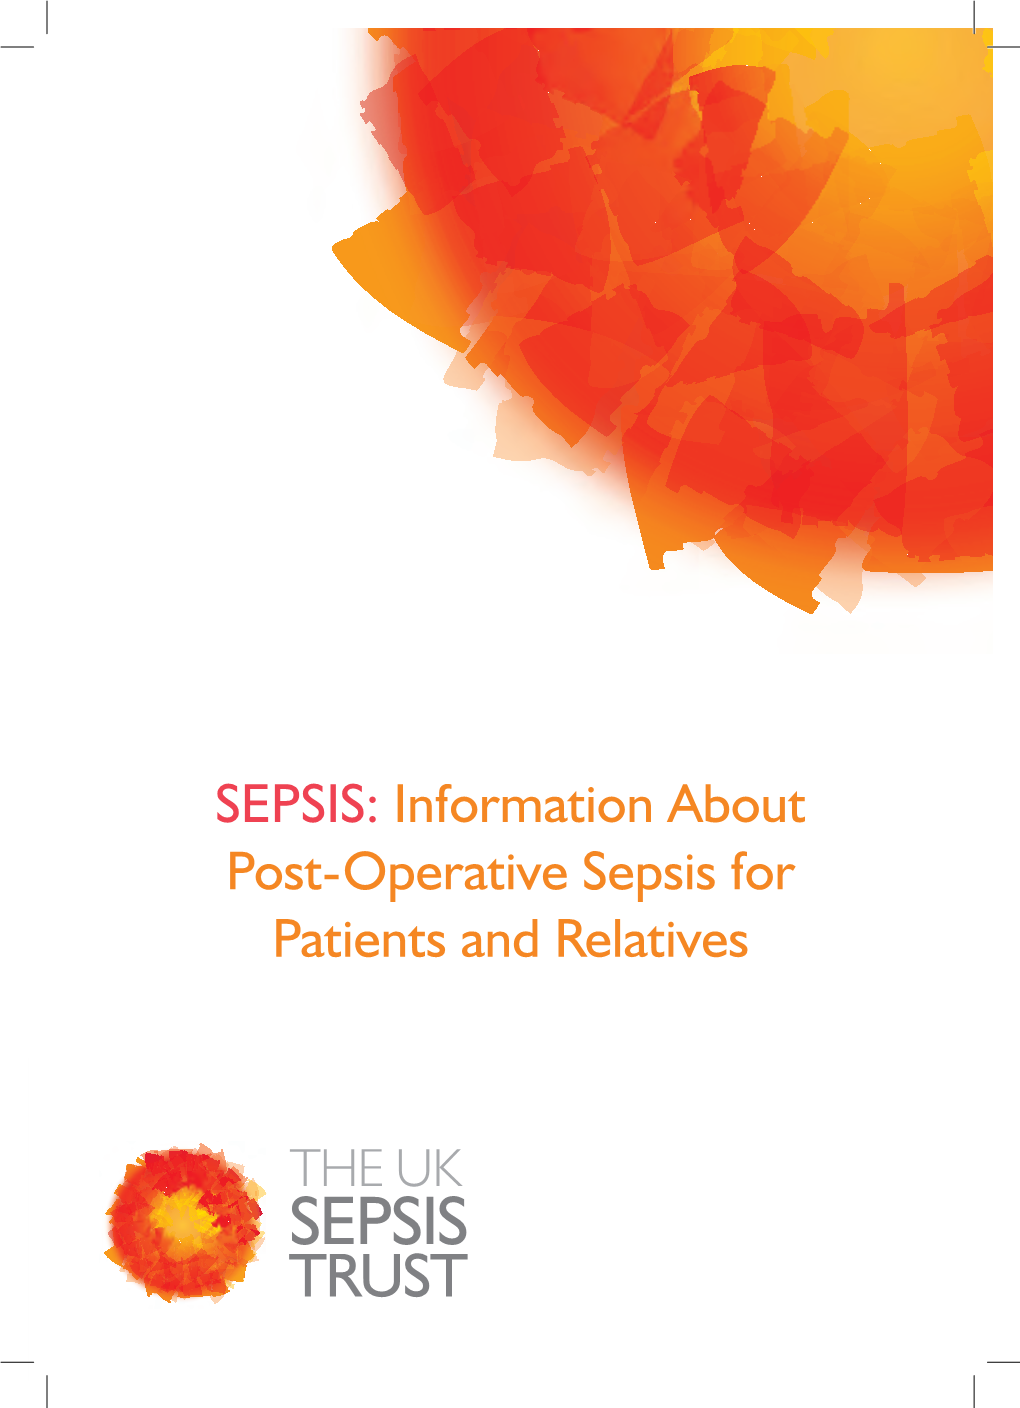 Information About Post-Operative Sepsis for Patients and Relatives HOW MANY PATIENTS SUFFER WHAT IS SEPSIS? from POST-OPERATIVE SEPSIS?